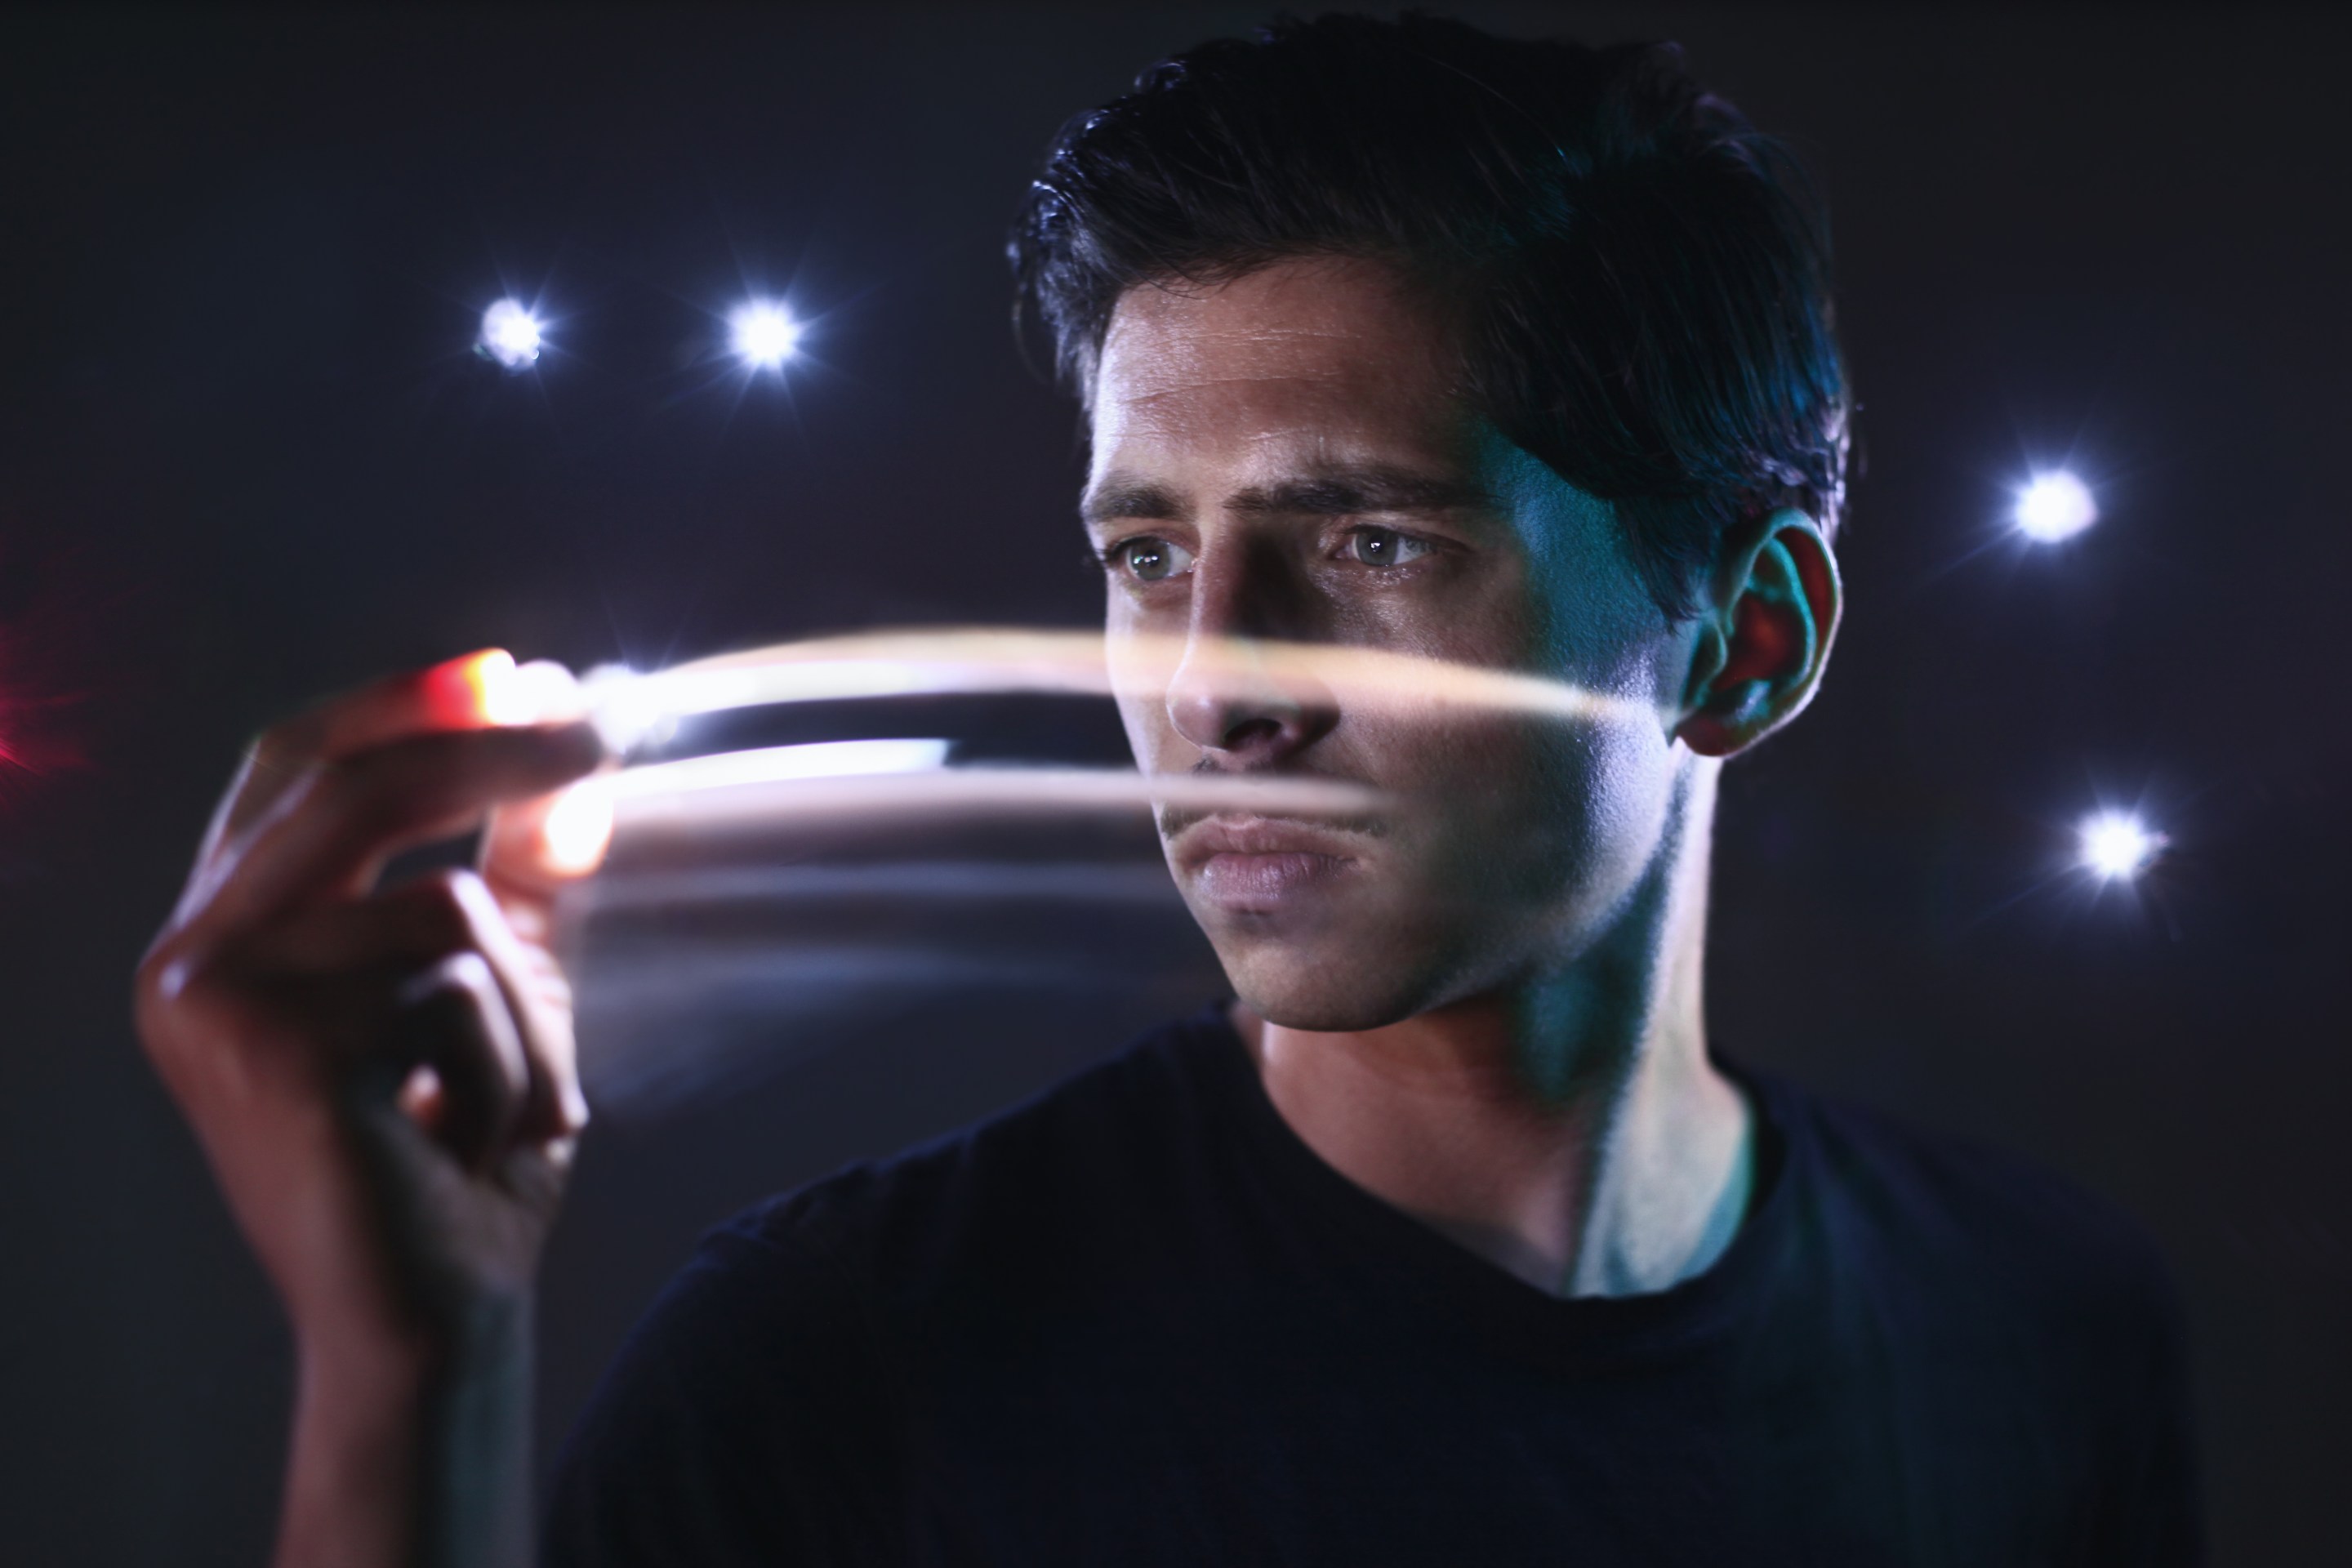 Portrait of man moving lights in his hand